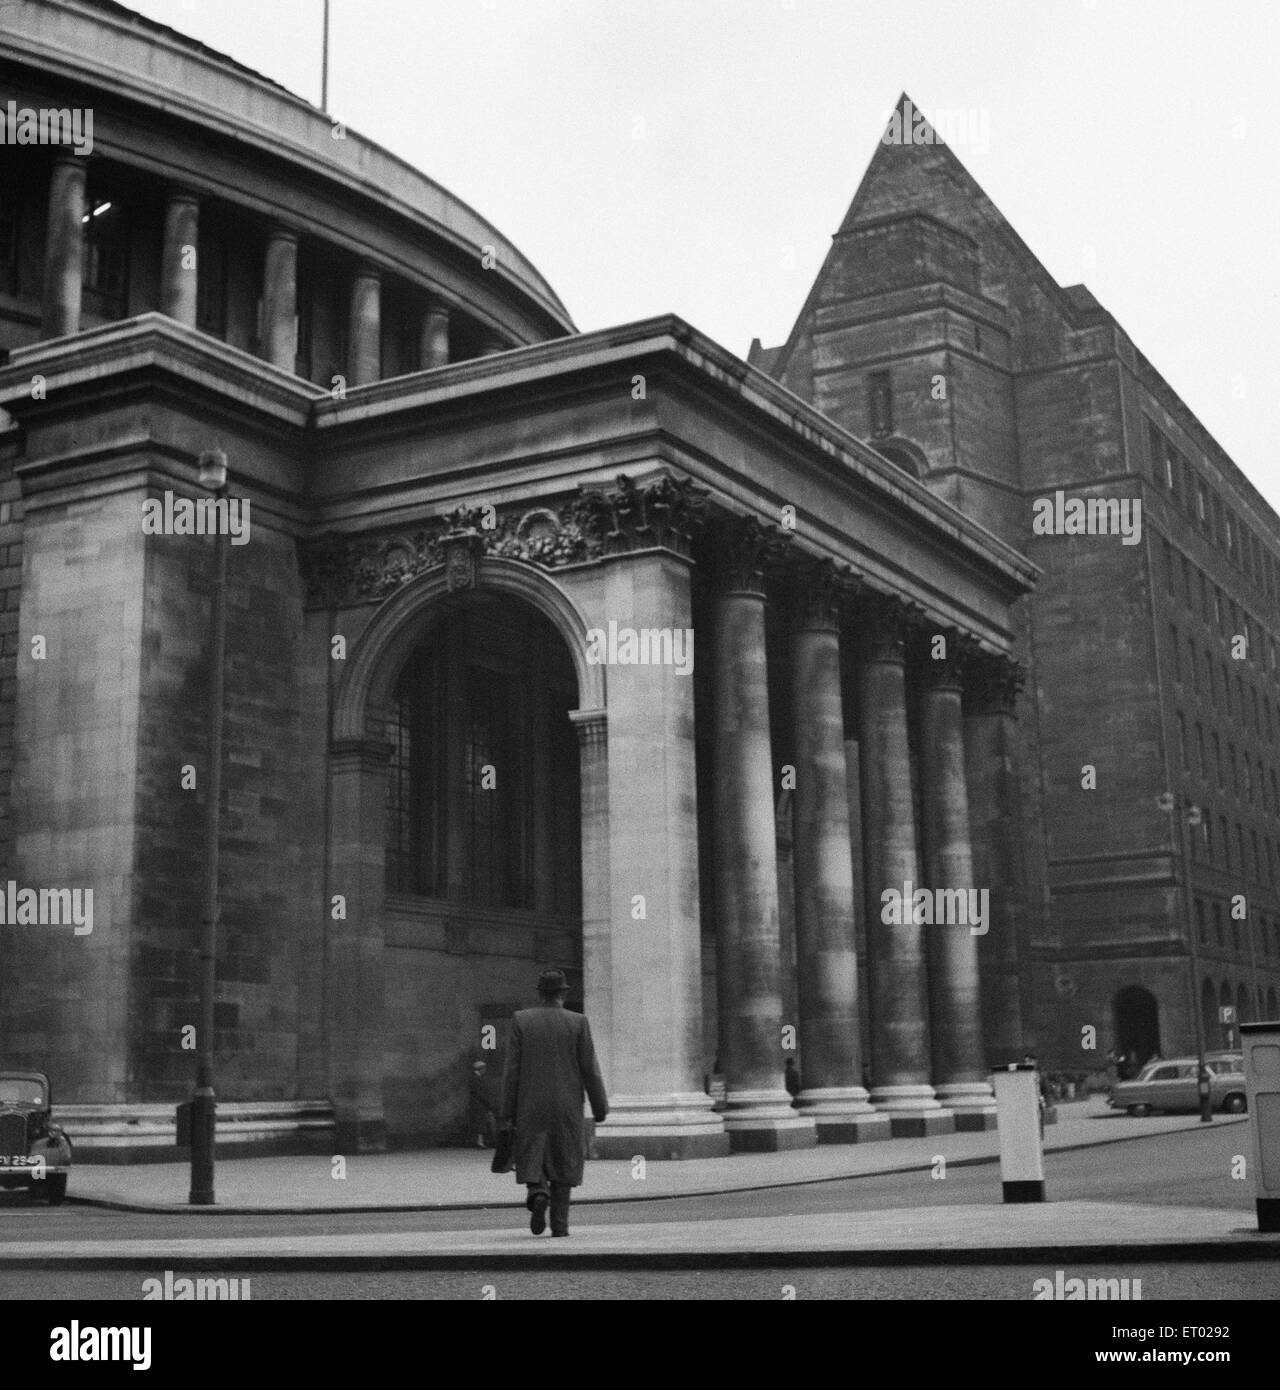 Manchester Central Library, 4. April 1953. Stockfoto